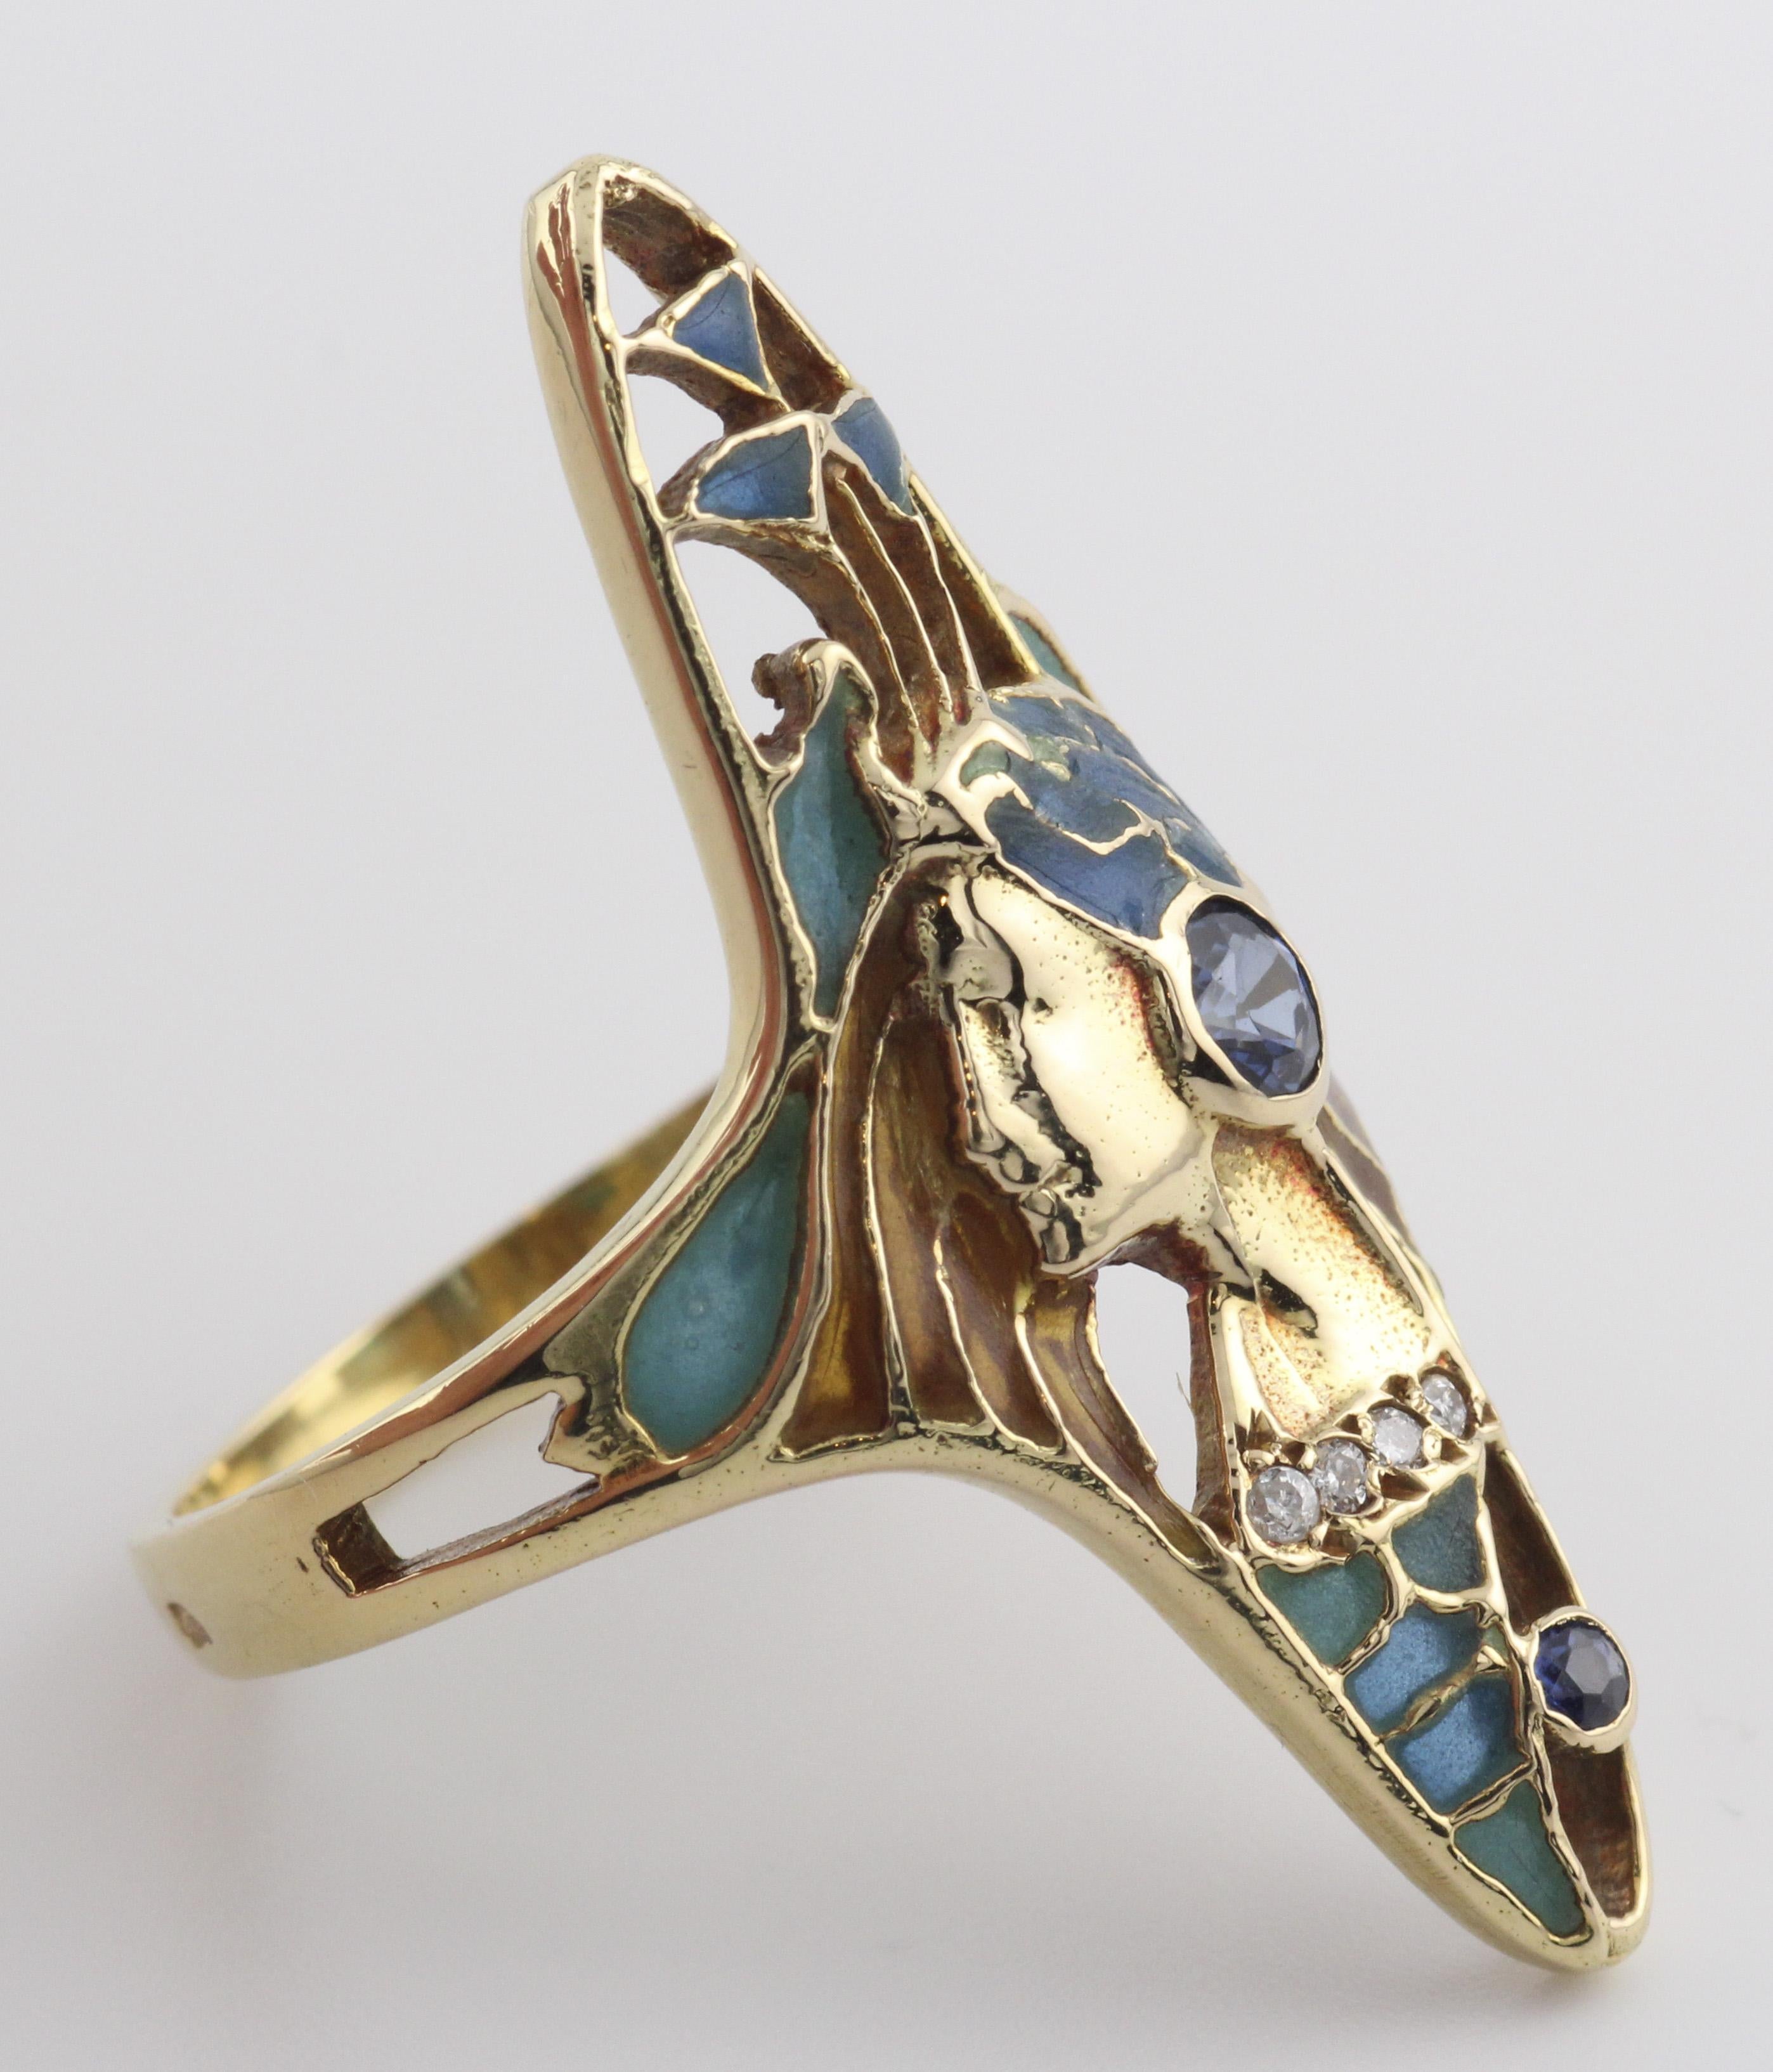 The Art Nouveau French Sapphire Diamond Enamel 18K Gold Ring is a magnificent and evocative piece of jewelry that embodies the exquisite artistry and enchanting aesthetic of the Art Nouveau movement. This ring features a stunning portrayal of a